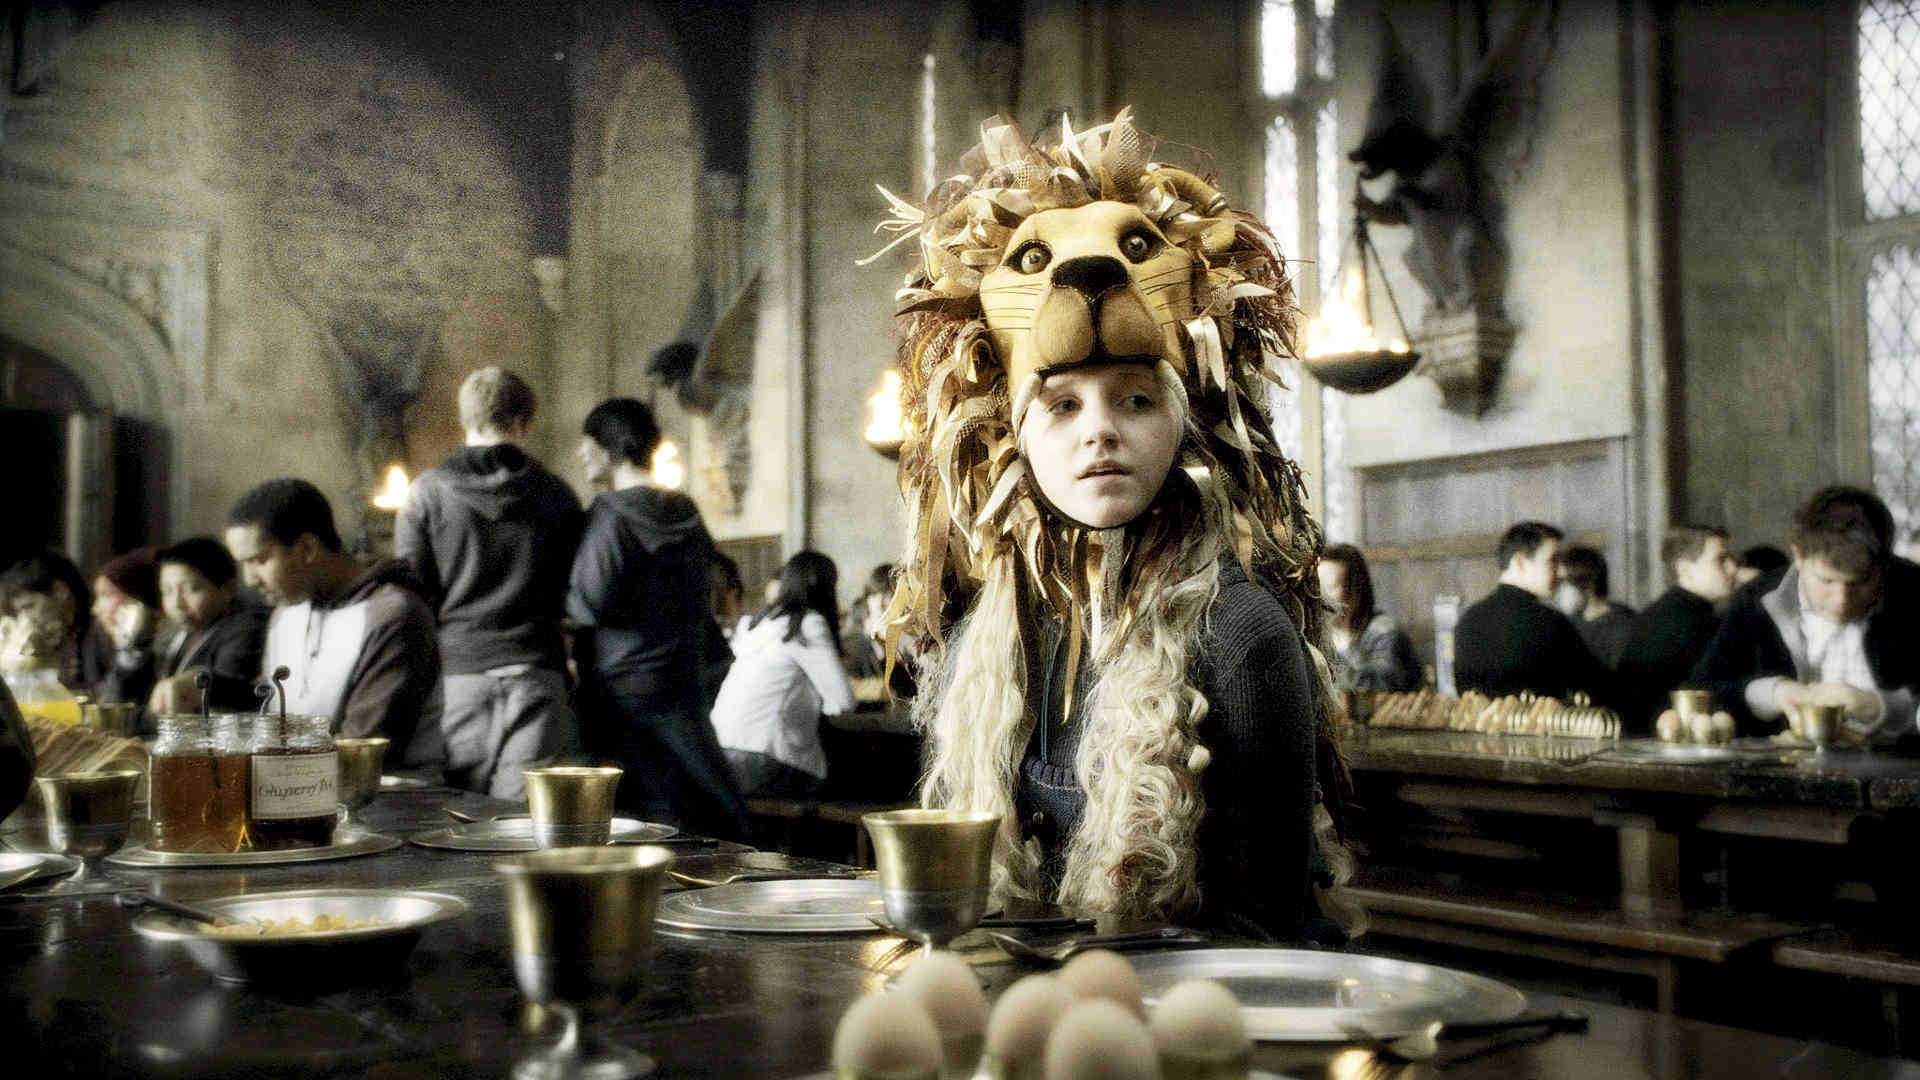 17 Reasons Harry Potter Fans Have More Fun Than Muggles